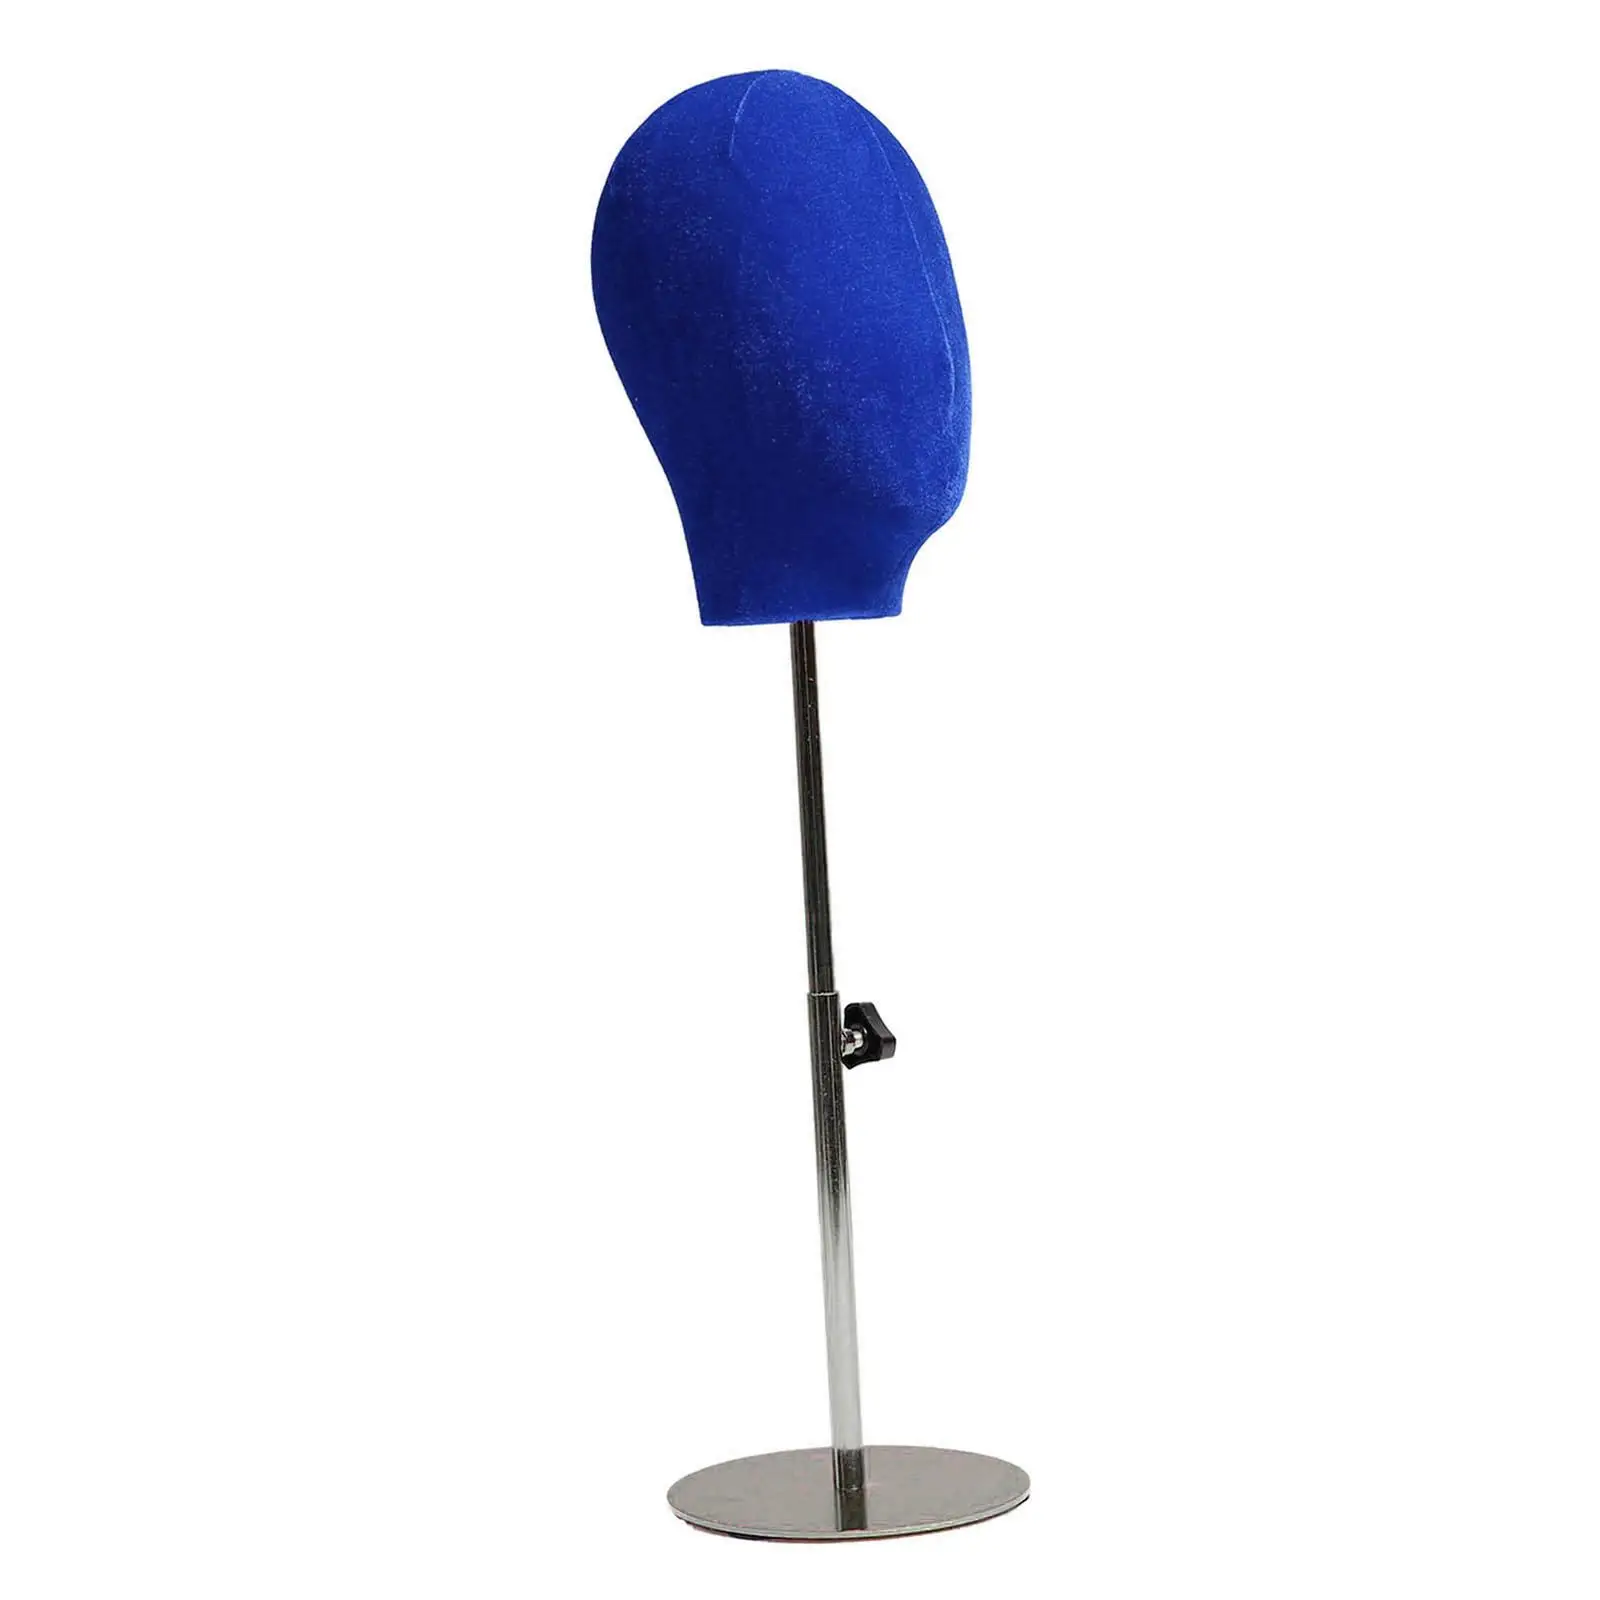 Mannequin Head Detachable Wig Hat Stand Durable Professional Display Holder Fashion Head Model for Home Shop Men Wig Women